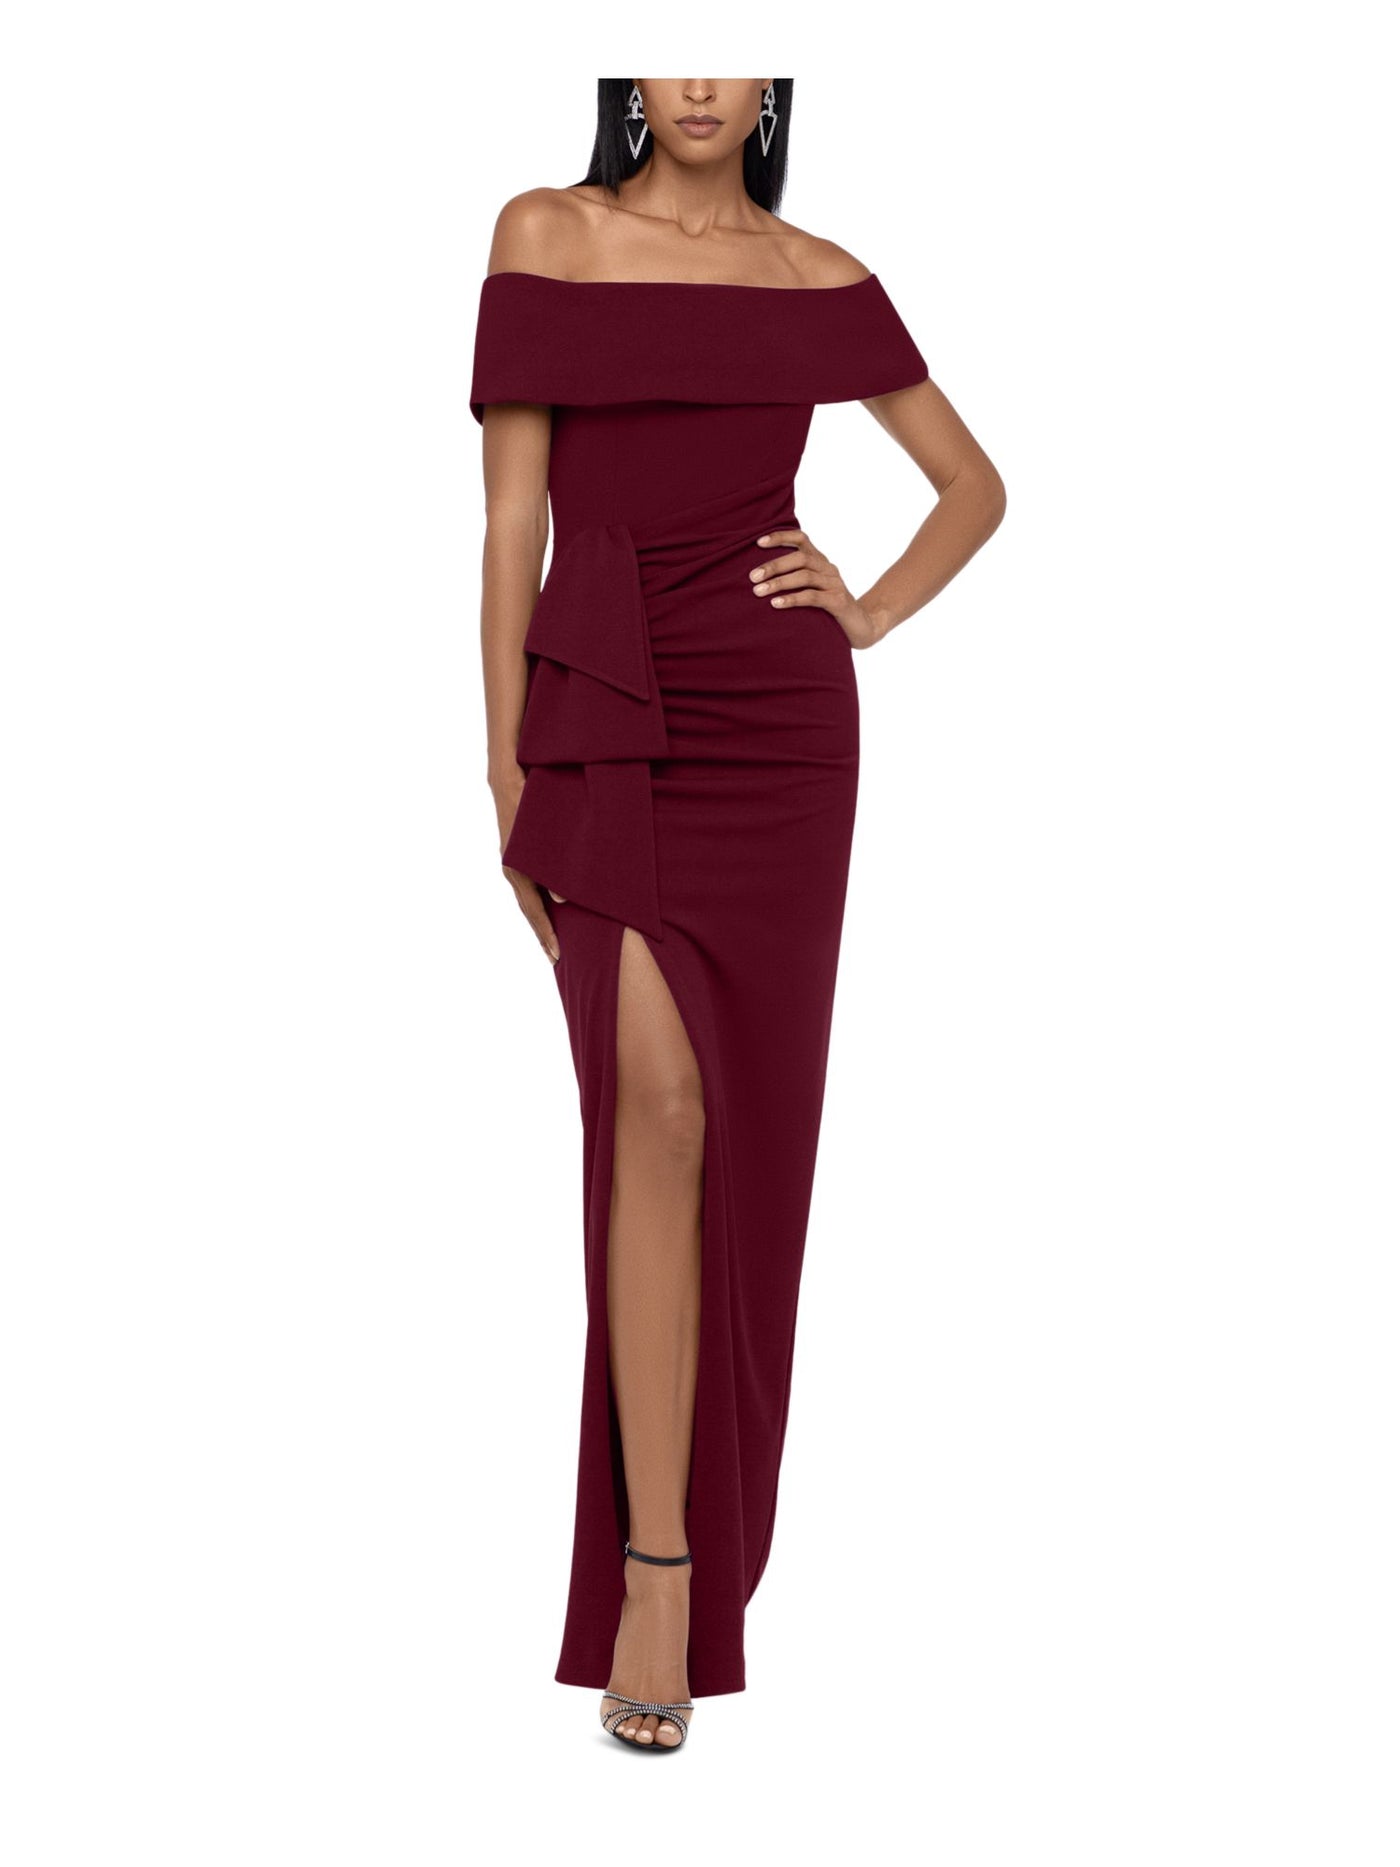 XSCAPE Womens Burgundy Zippered Slitted Lined Ruched Ruffled Short Sleeve Off Shoulder Full-Length Evening Gown Dress 12